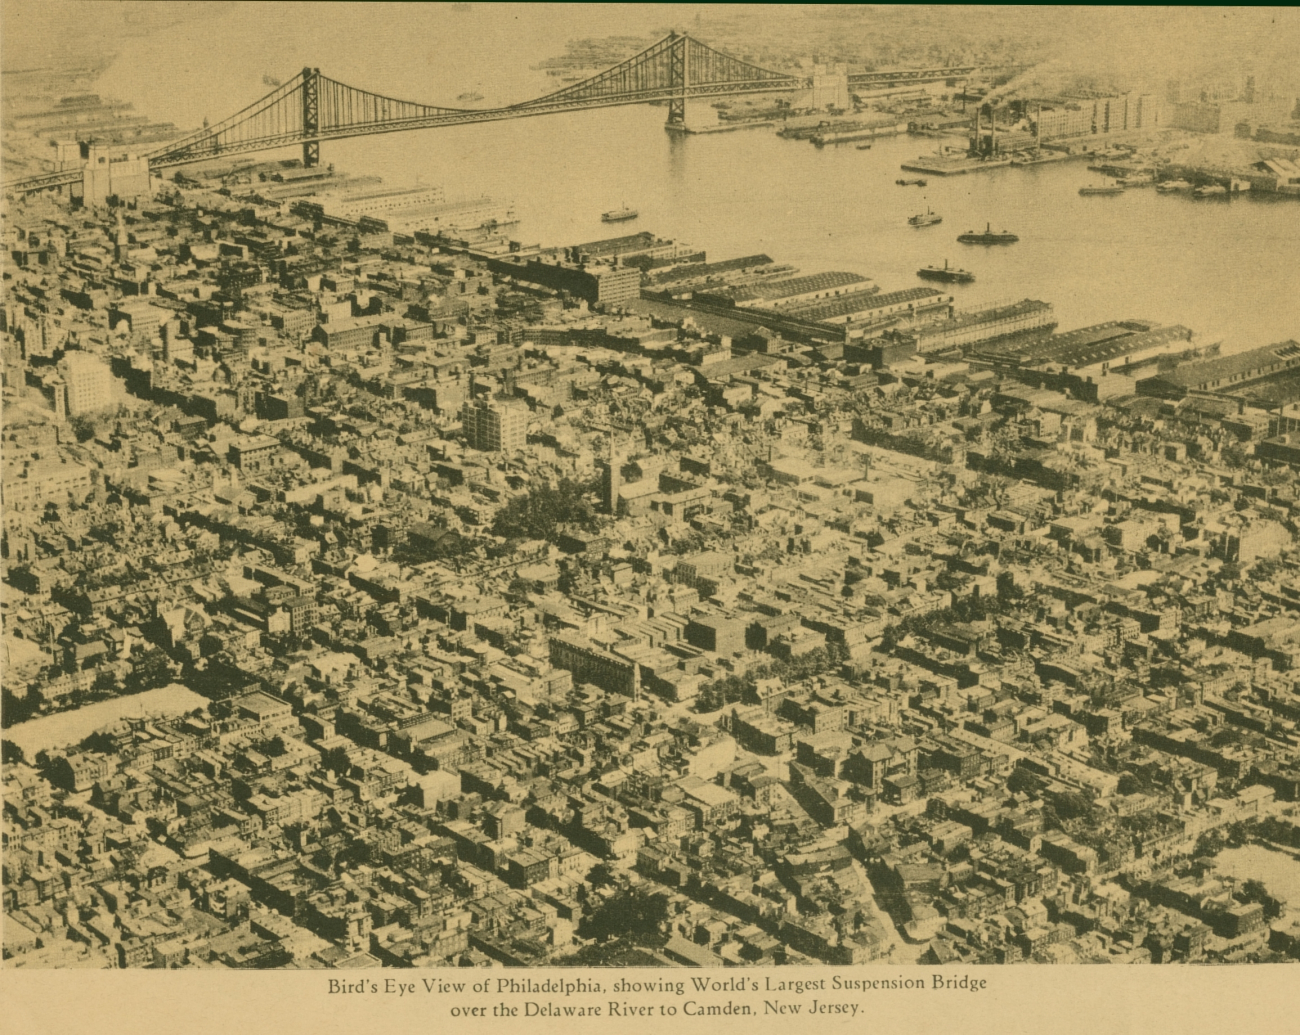 Aerial view of downtown Philadelphia and the Philadelphia waterfront showingwhat was then the world's largest suspension bridge